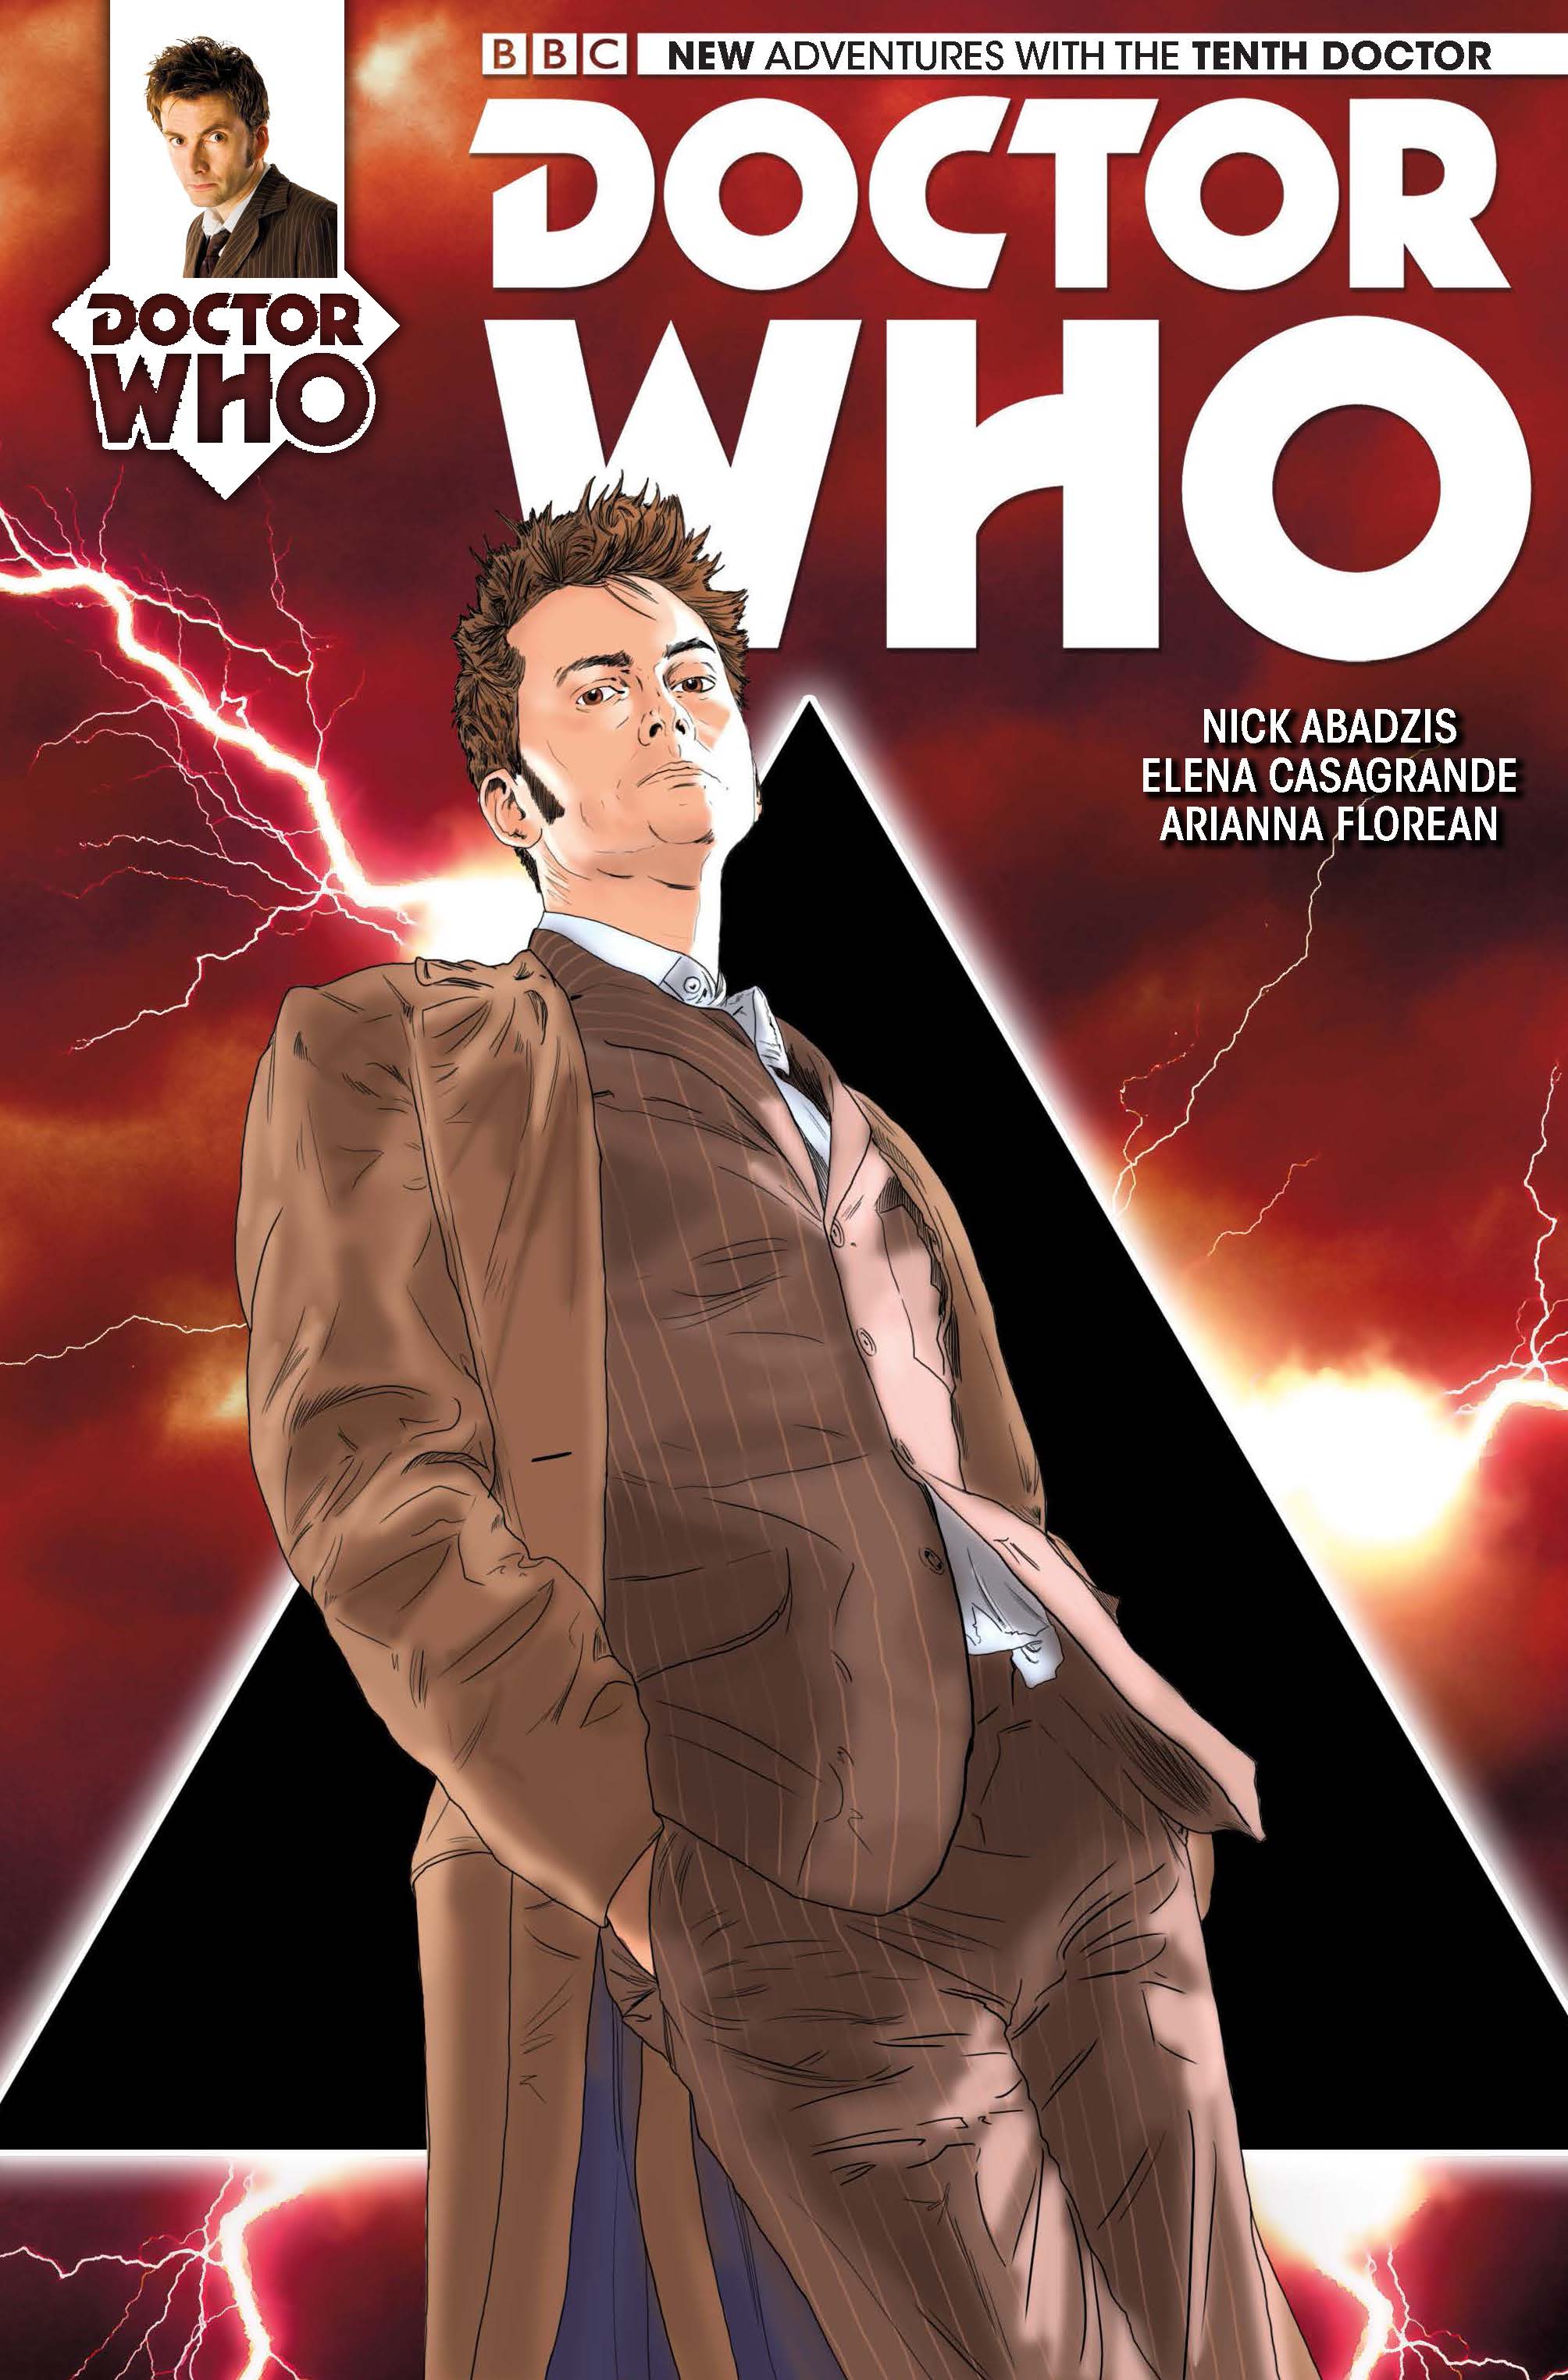 Doctor Who: Tenth Doctor #11